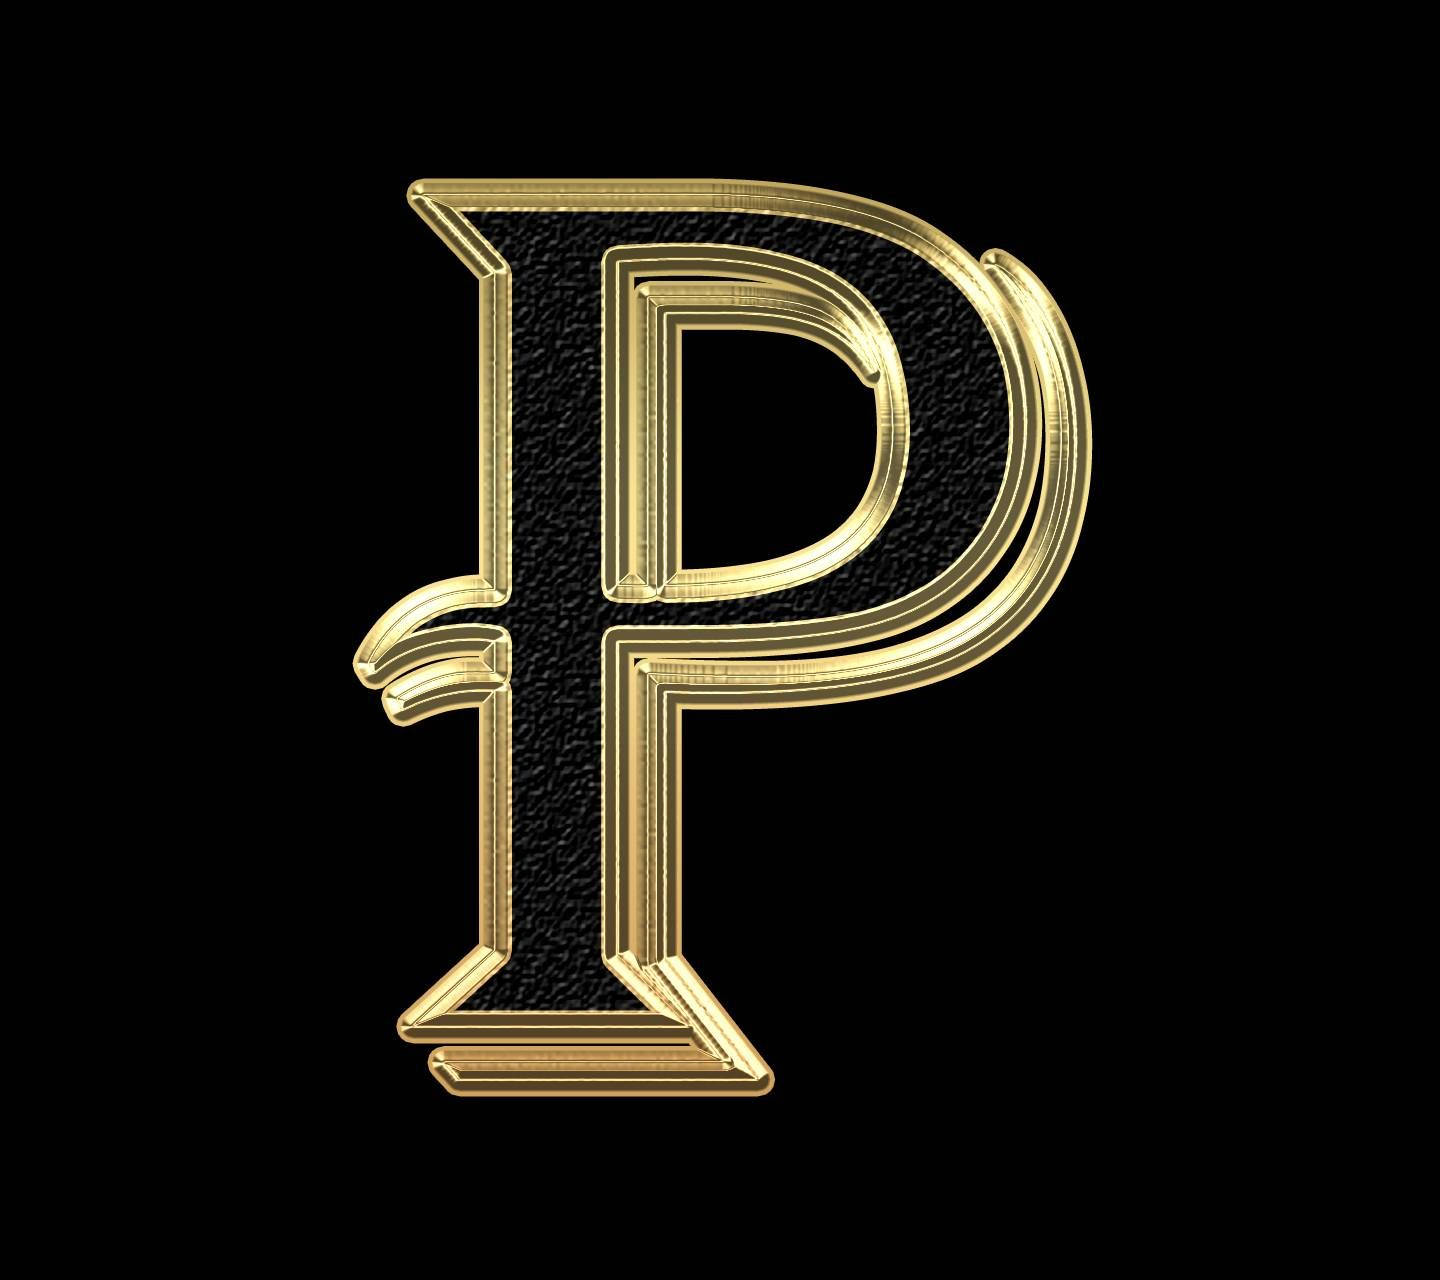 Black And Gold Letter P Wallpaper